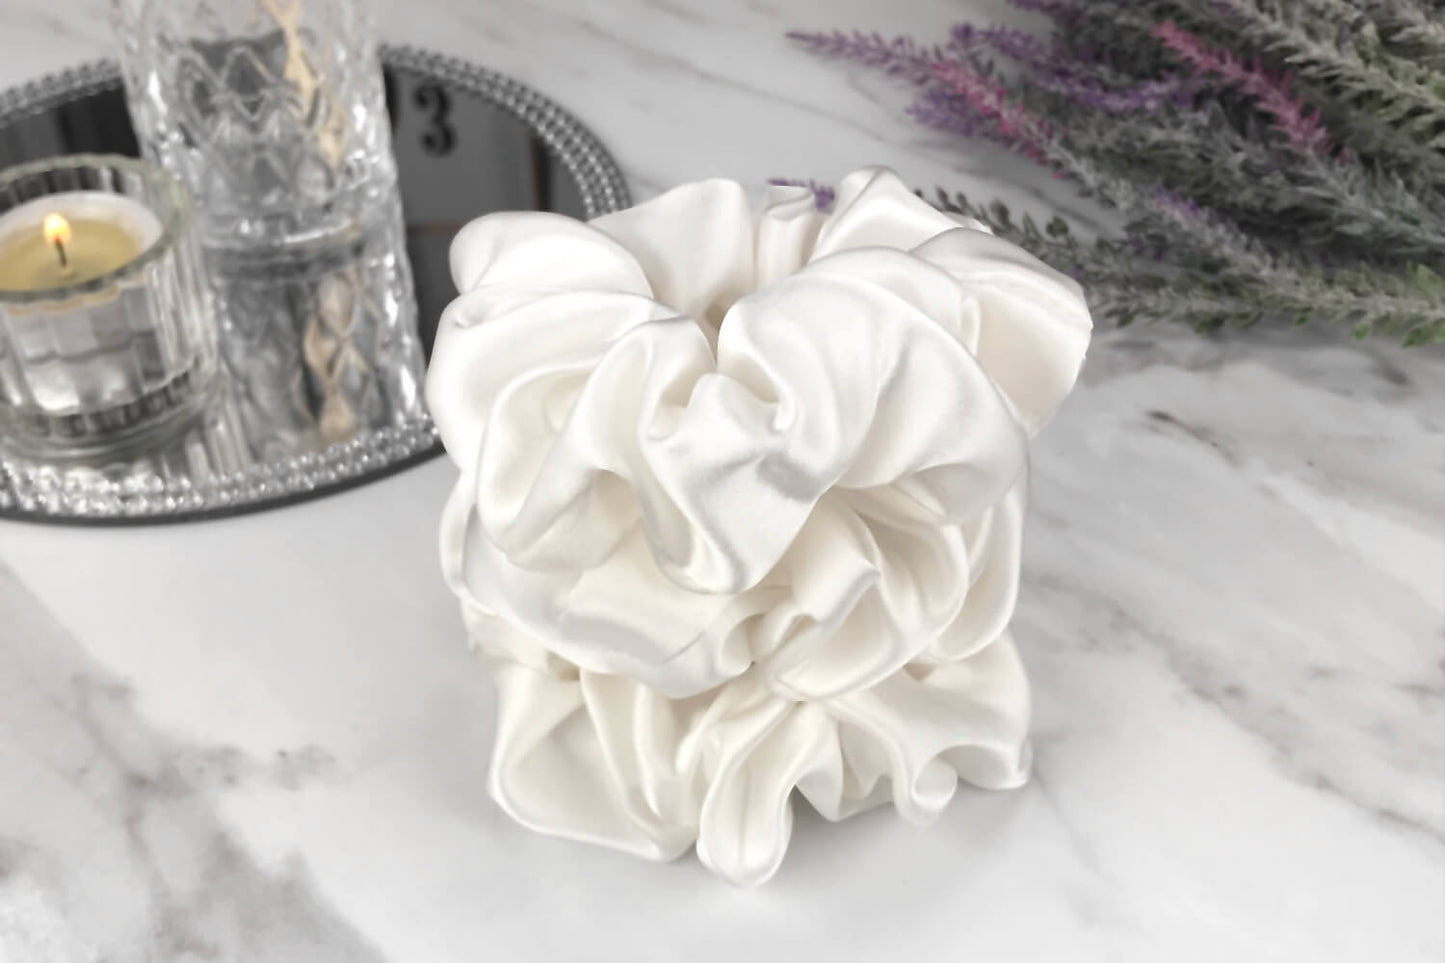  Celestial Silk large undyed ivory silk scrunchies stacked on marble counter with lavender plant and a candle in the background